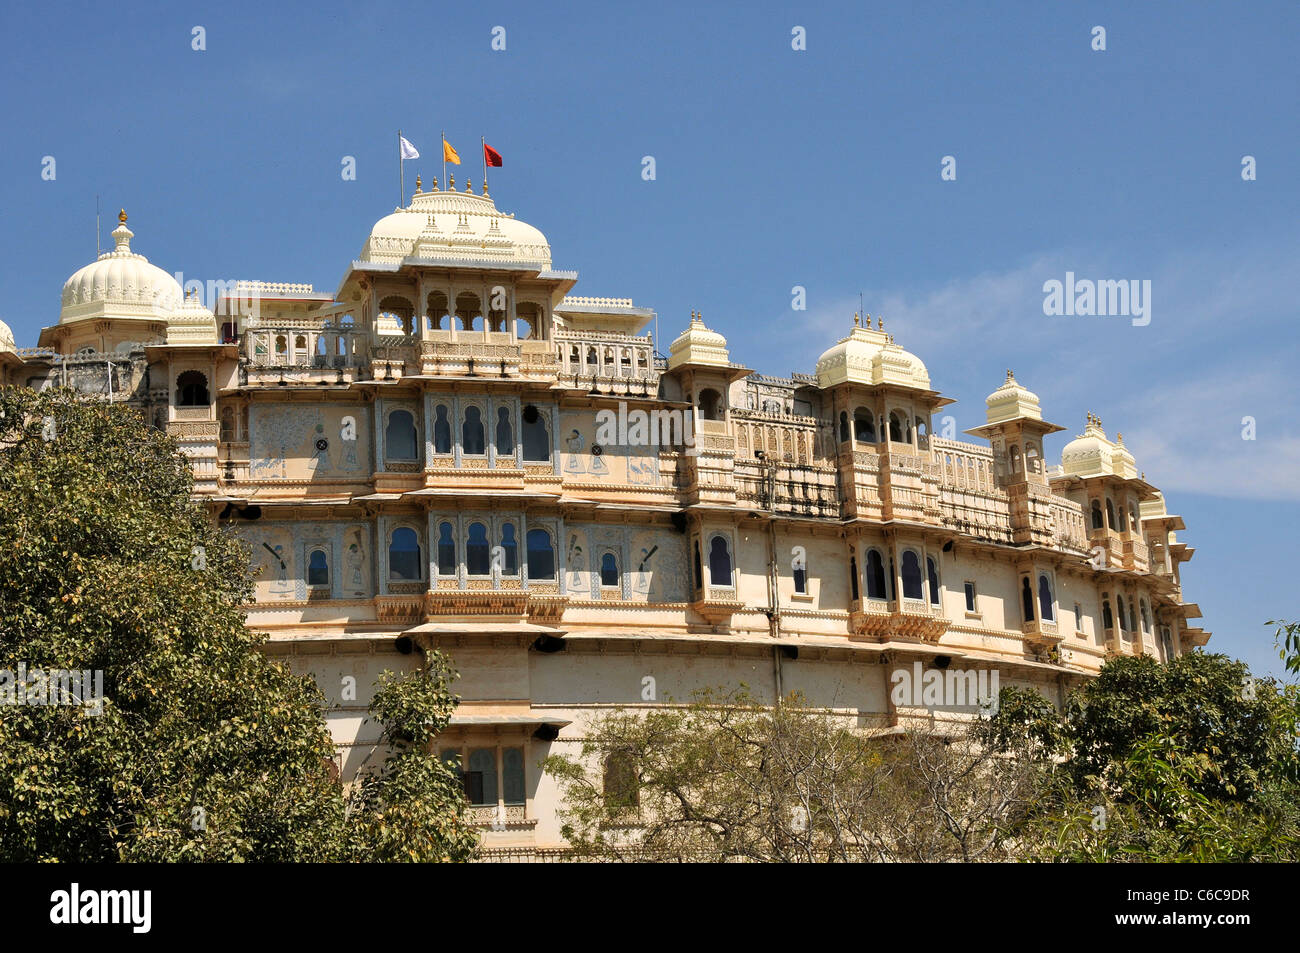 Details City Palace Udaipur Rajasthan Indien Stockfoto